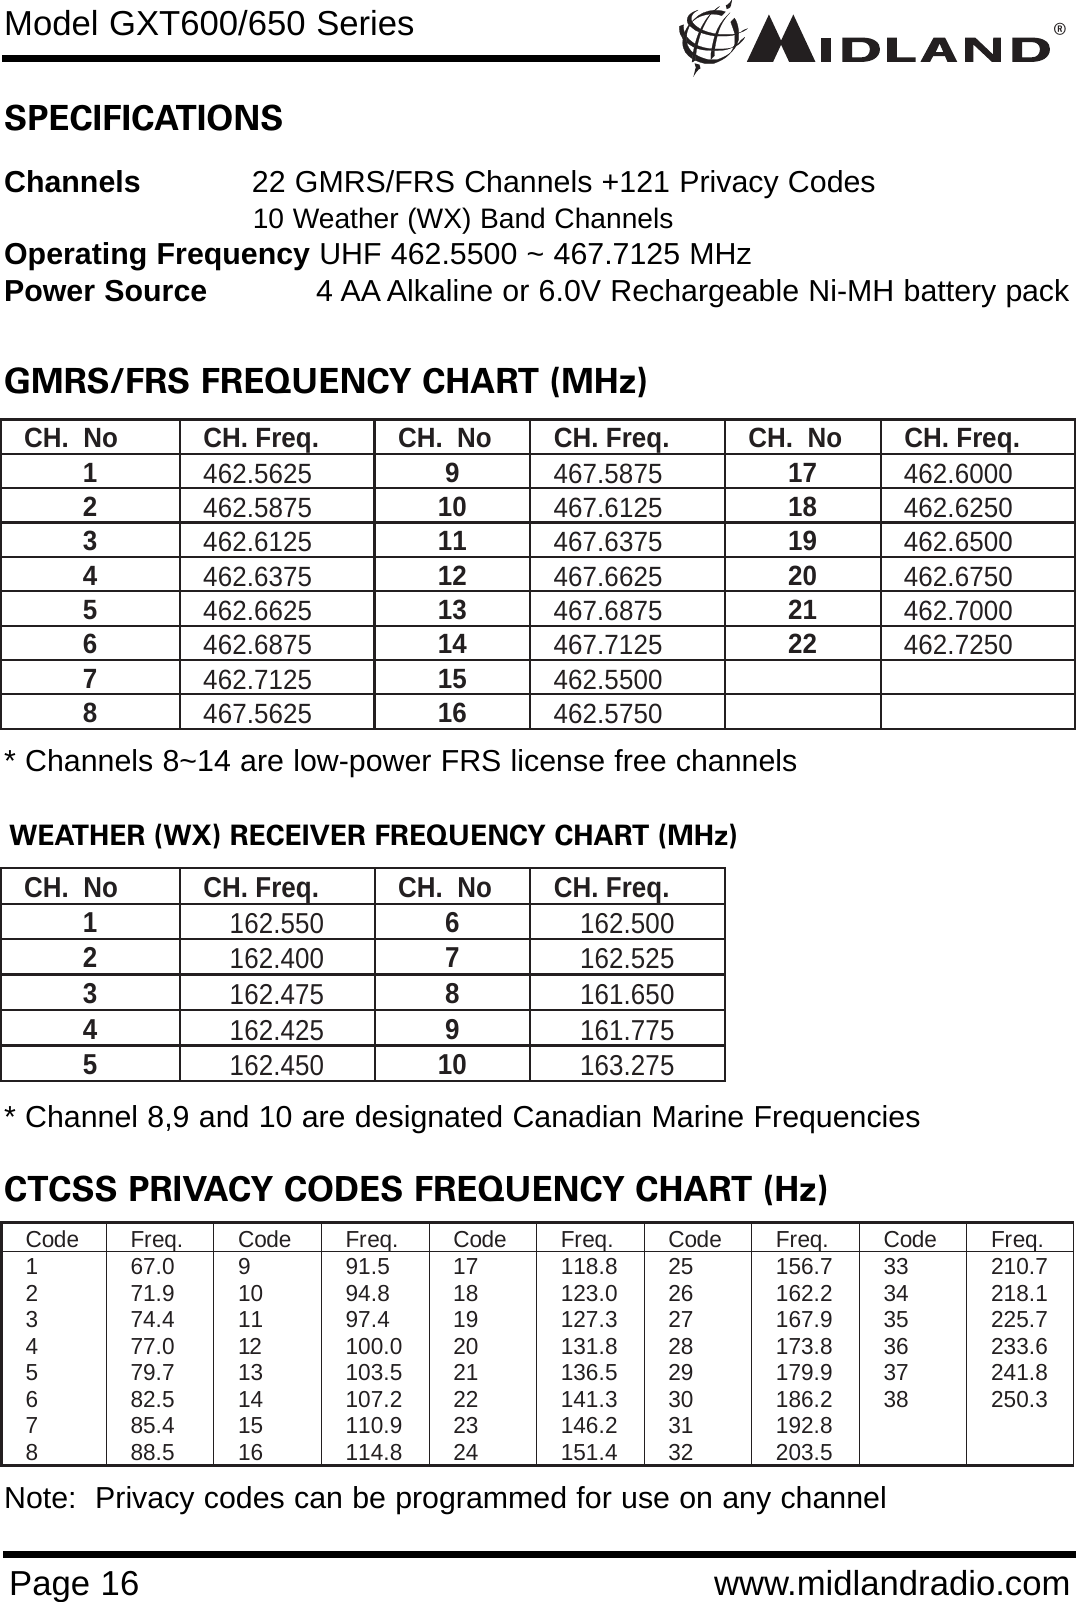 ®Page 16 www.midlandradio.comSPECIFICATIONSChannels 22 GMRS/FRS Channels +121 Privacy Codes10 Weather (WX) Band Channels Operating Frequency UHF 462.5500 ~ 467.7125 MHzPower Source 4 AA Alkaline or 6.0V Rechargeable Ni-MH battery packGMRS/FRS FREQUENCY CHART (MHz)CH.  No  CH. Freq.  CH.  No  CH. Freq.  CH.  No  CH. Freq. 1  462.5625 9  467.5875 17  462.6000 2  462.5875 10  467.6125 18  462.6250 3  462.6125 11  467.6375 19  462.6500 4  462.6375 12  467.6625 20  462.6750 5  462.6625 13  467.6875 21  462.7000 6  462.6875 14  467.7125 22  462.7250 7  462.7125 15  462.5500   8  467.5625 16  462.5750   WEATHER (WX) RECEIVER FREQUENCY CHART (MHz)CH.  No  CH. Freq.  CH.  No  CH. Freq. 1  162.550 6  162.500 2  162.400 7  162.525 3  162.475 8  161.650 4  162.425 9  161.775 5  162.450 10  163.275 CTCSS PRIVACY CODES FREQUENCY CHART (Hz)Code Freq.  Code Freq.  Code Freq.  Code Freq.  Code Freq.  1  67.0 9  91.5 17  118.8 25  156.7 33  210.7 2  71.9 10  94.8 18  123.0 26  162.2 34  218.1 3  74.4 11  97.4 19  127.3 27  167.9 35  225.7 4 77.0 12 100.0 20  131.8 28  173.8 36  233.6 5 79.7 13 103.5 21  136.5 29  179.9 37  241.8 6 82.5 14 107.2 22  141.3 30  186.2 38  250.3 7 85.4 15 110.9 23  146.2 31  192.8    8 88.5 16 114.8 24  151.4 32  203.5    * Channel 8,9 and 10 are designated Canadian Marine Frequencies* Channels 8~14 are low-power FRS license free channelsNote:  Privacy codes can be programmed for use on any channelModel GXT600/650 Series